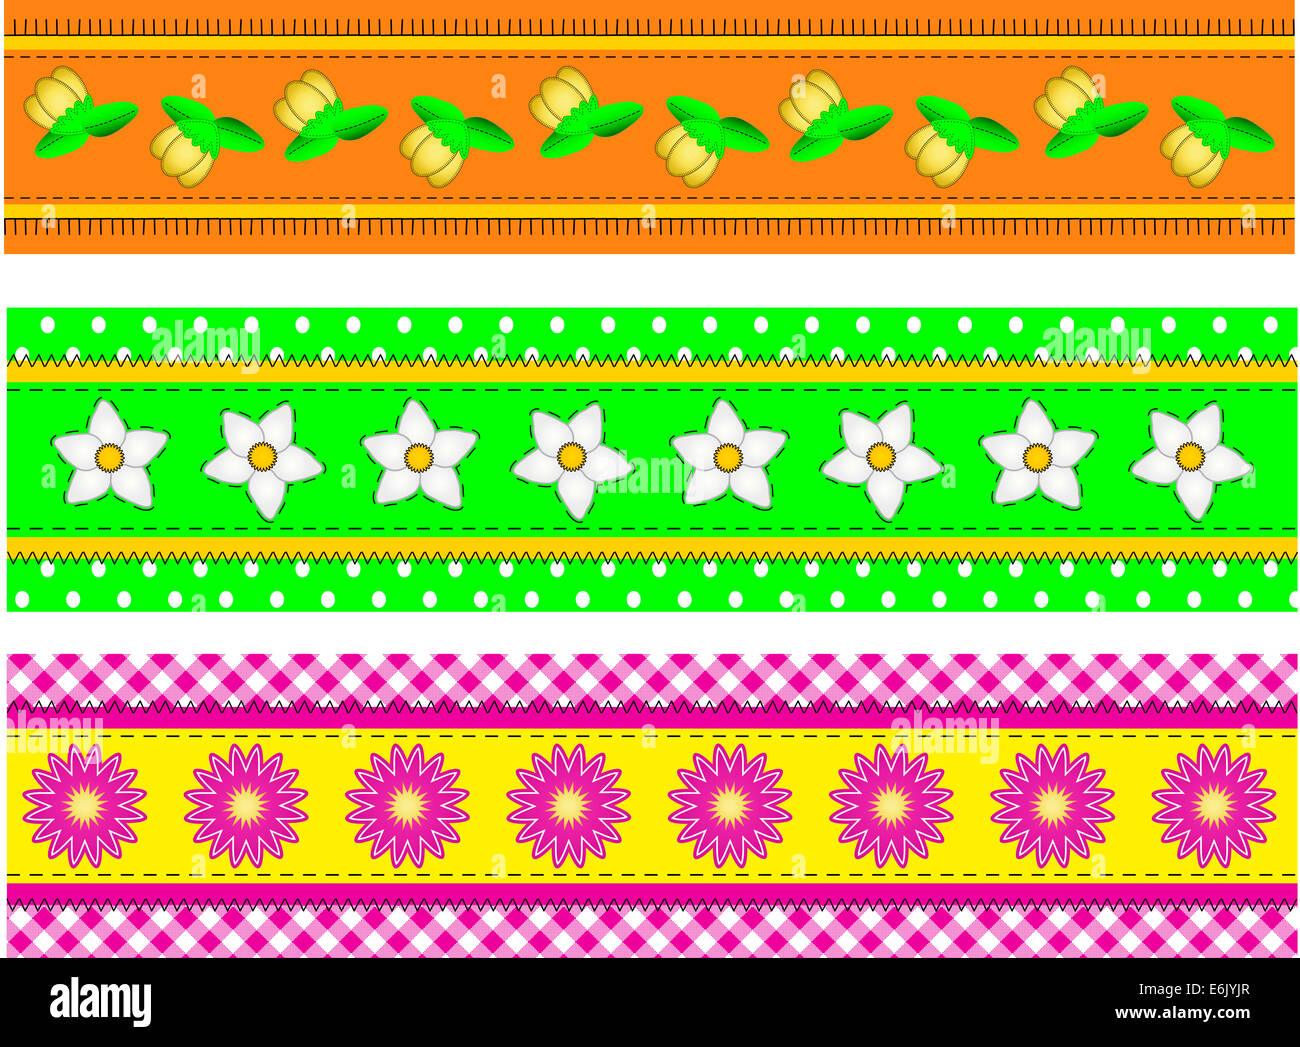 Jpg  Three Flower Borders with dots, gingham and quilting stitches.  One of a series. Stock Photo